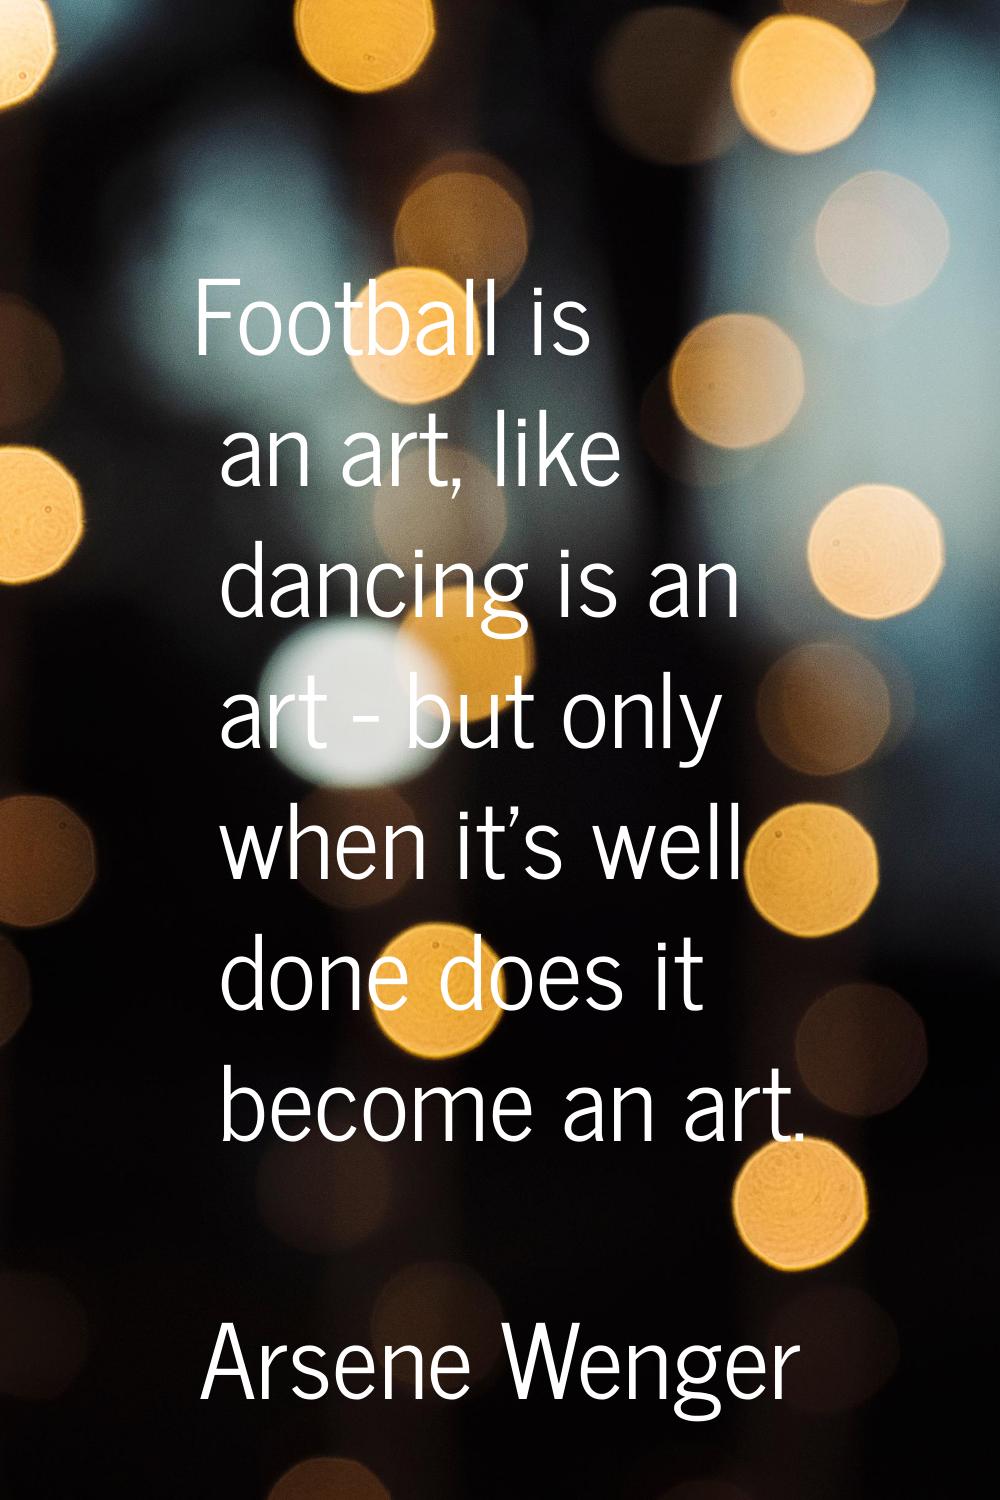 Football is an art, like dancing is an art - but only when it's well done does it become an art.